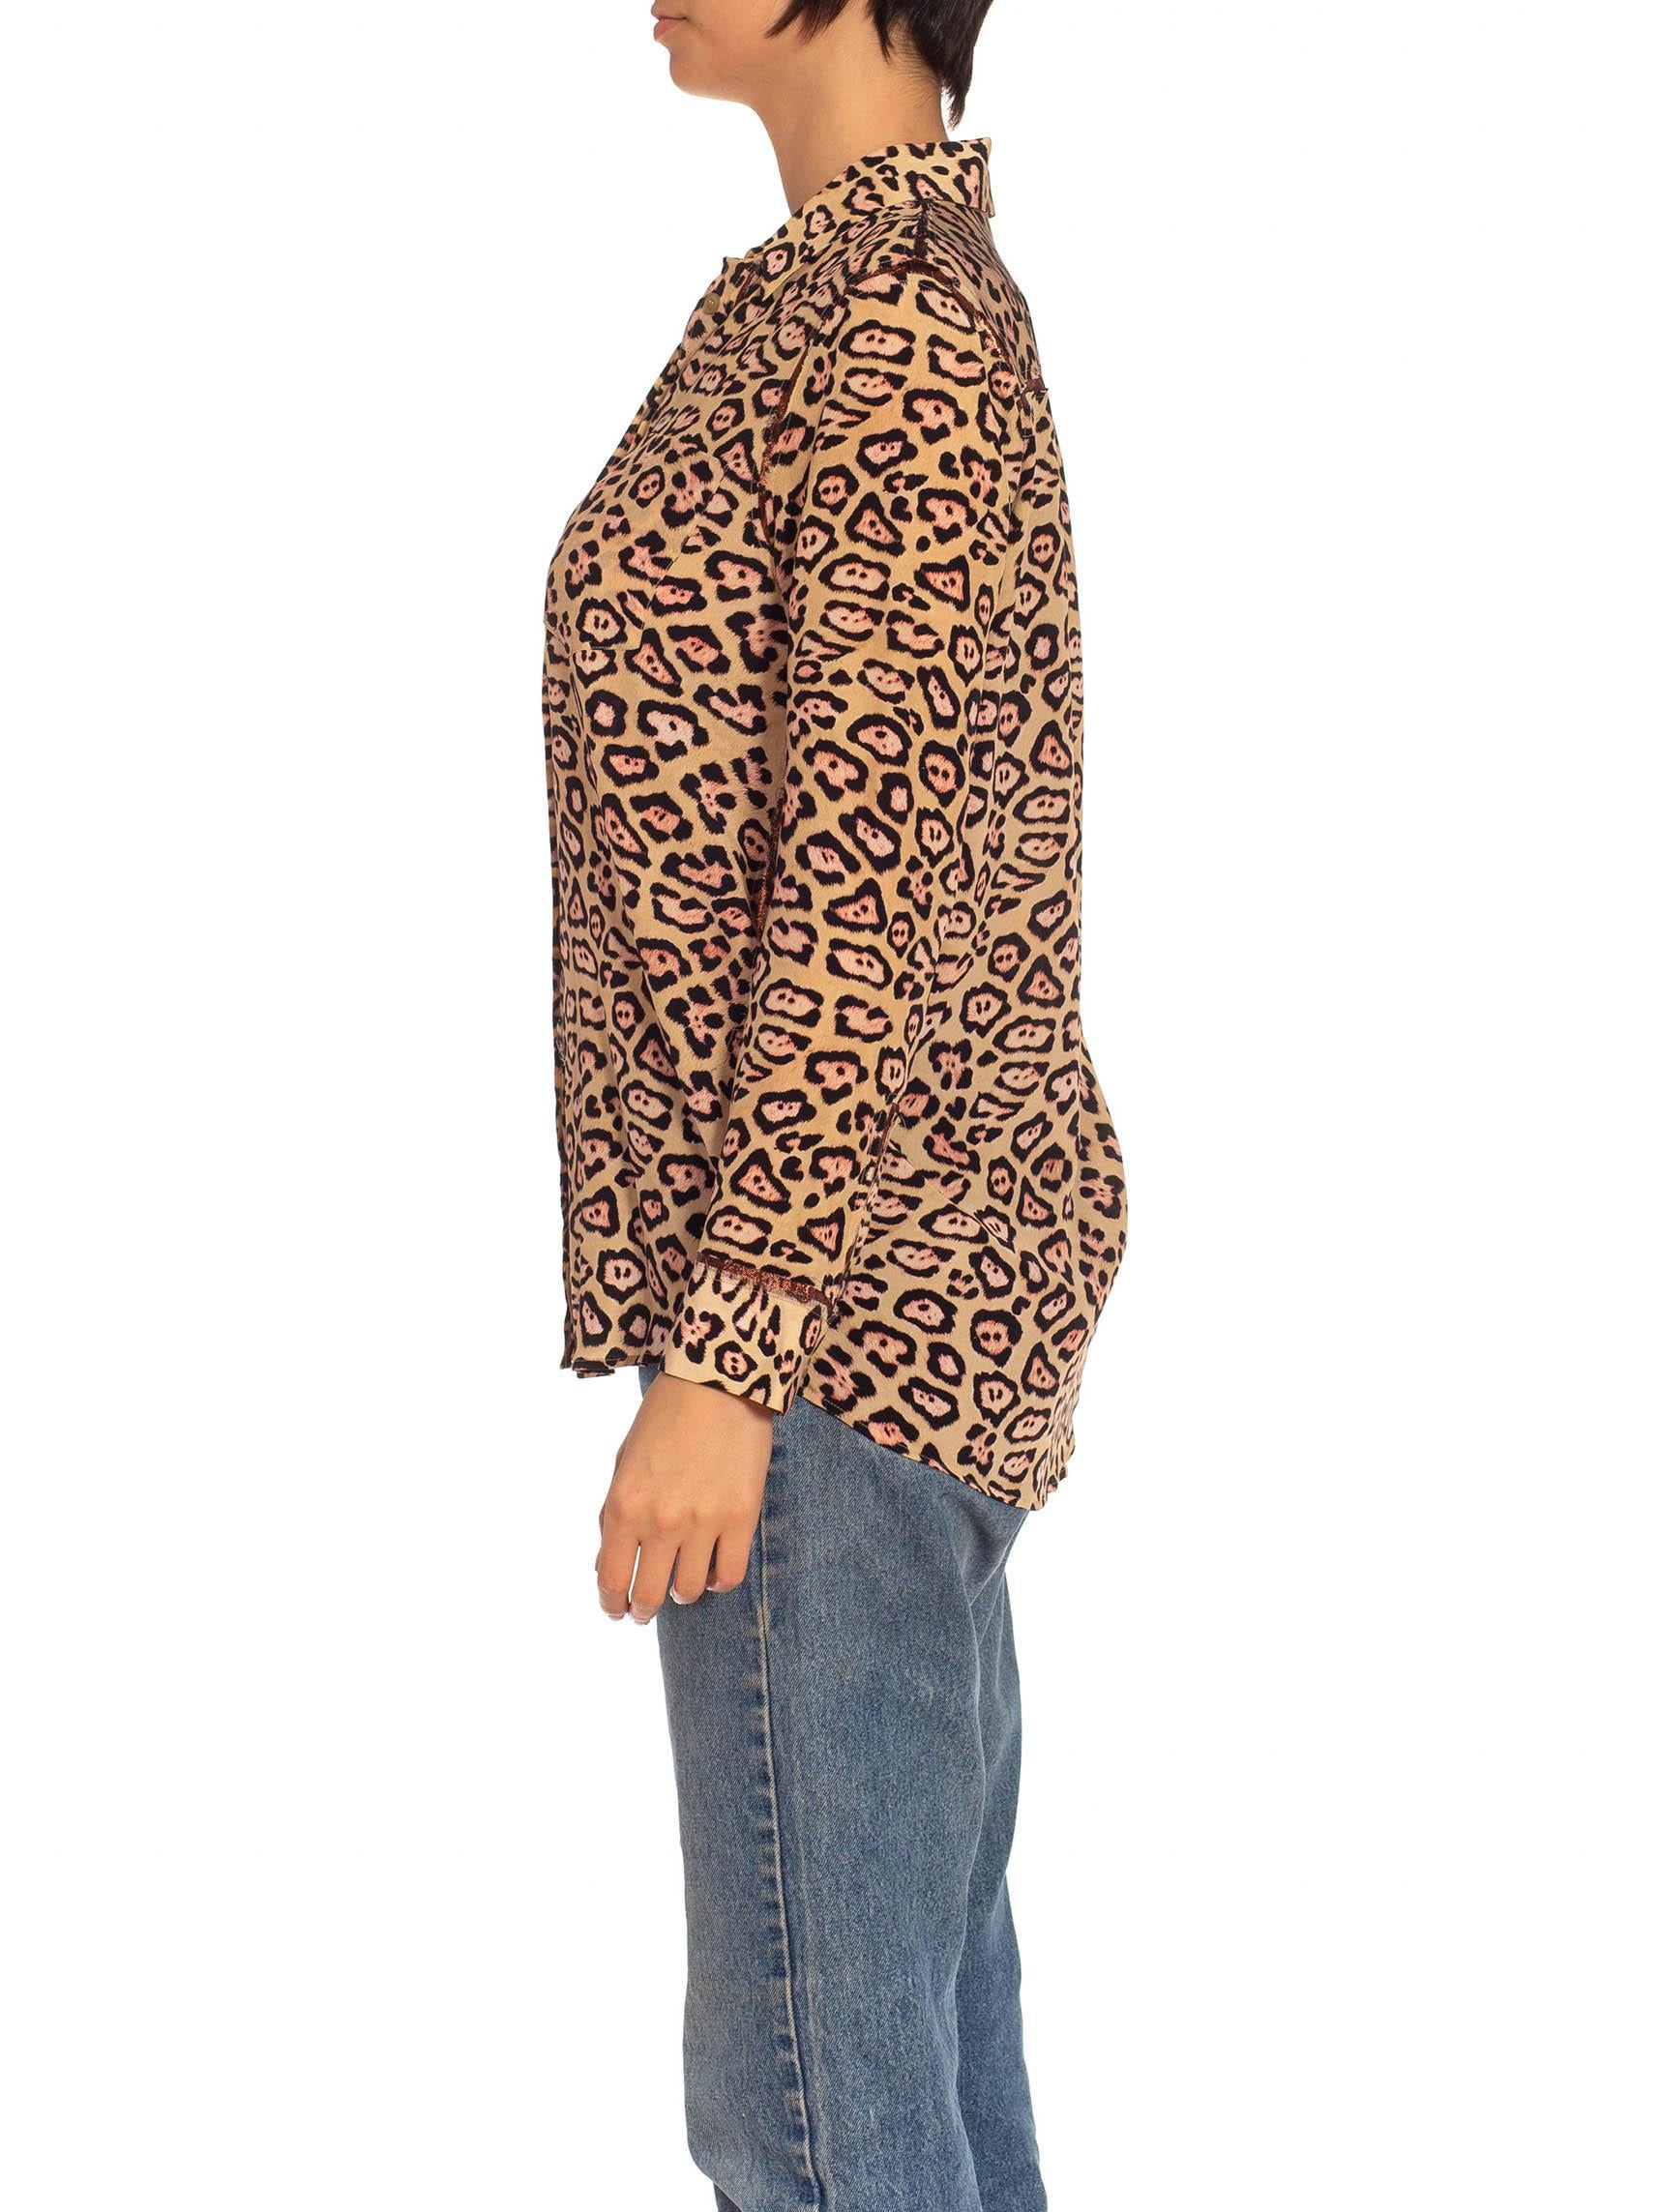 2010S GIVENCHY Leopard Print Tan & Brown Silk With Metallic Trimmings Shirt In Excellent Condition For Sale In New York, NY